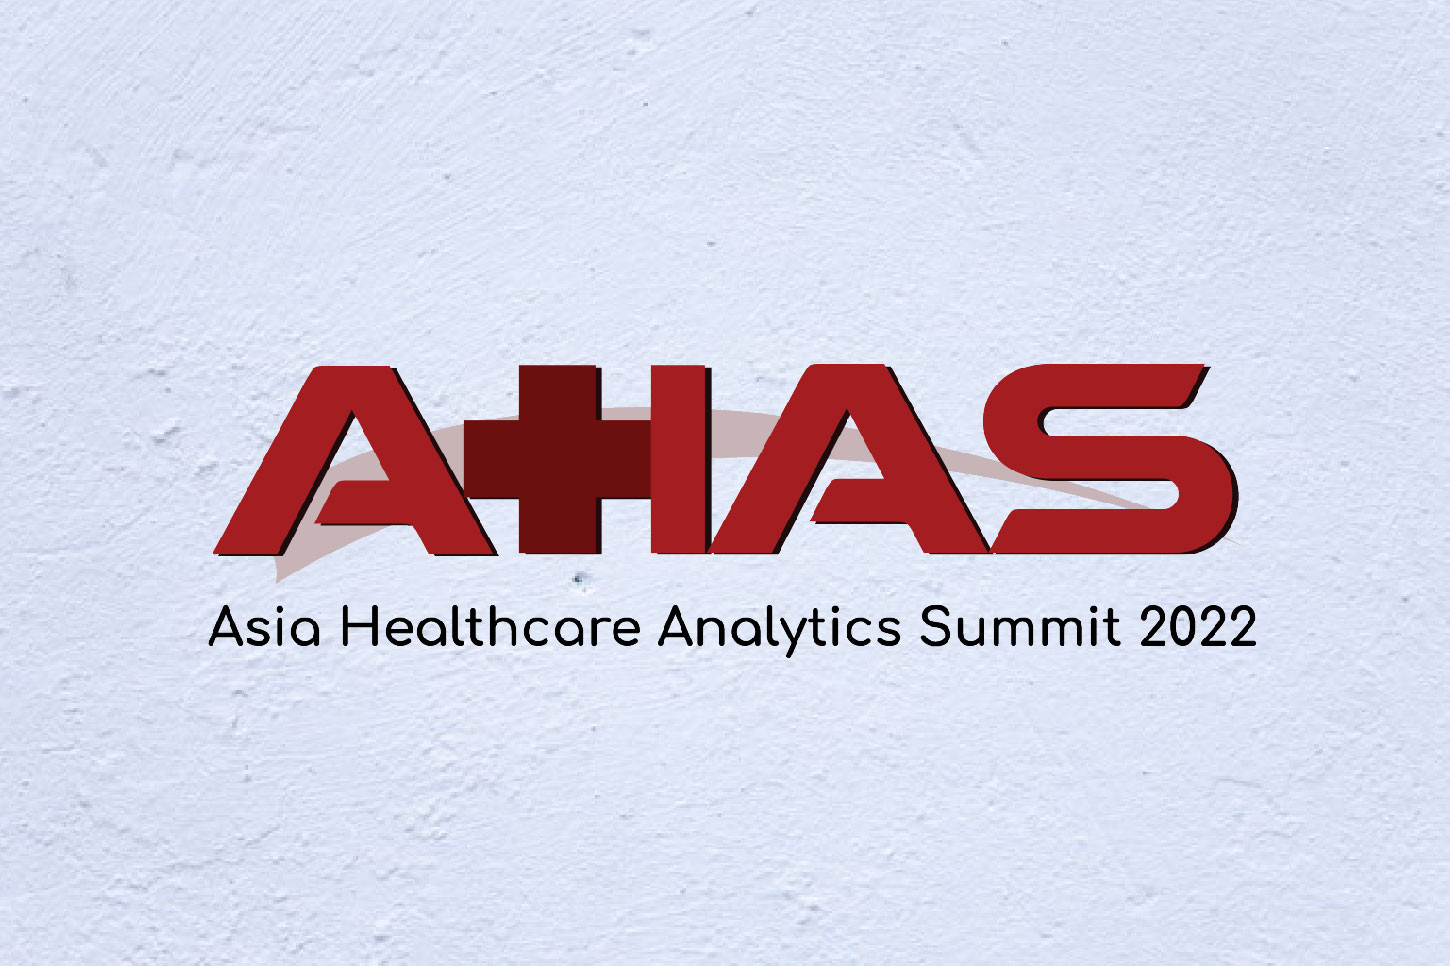 Top 5 healthcare events in Asia 